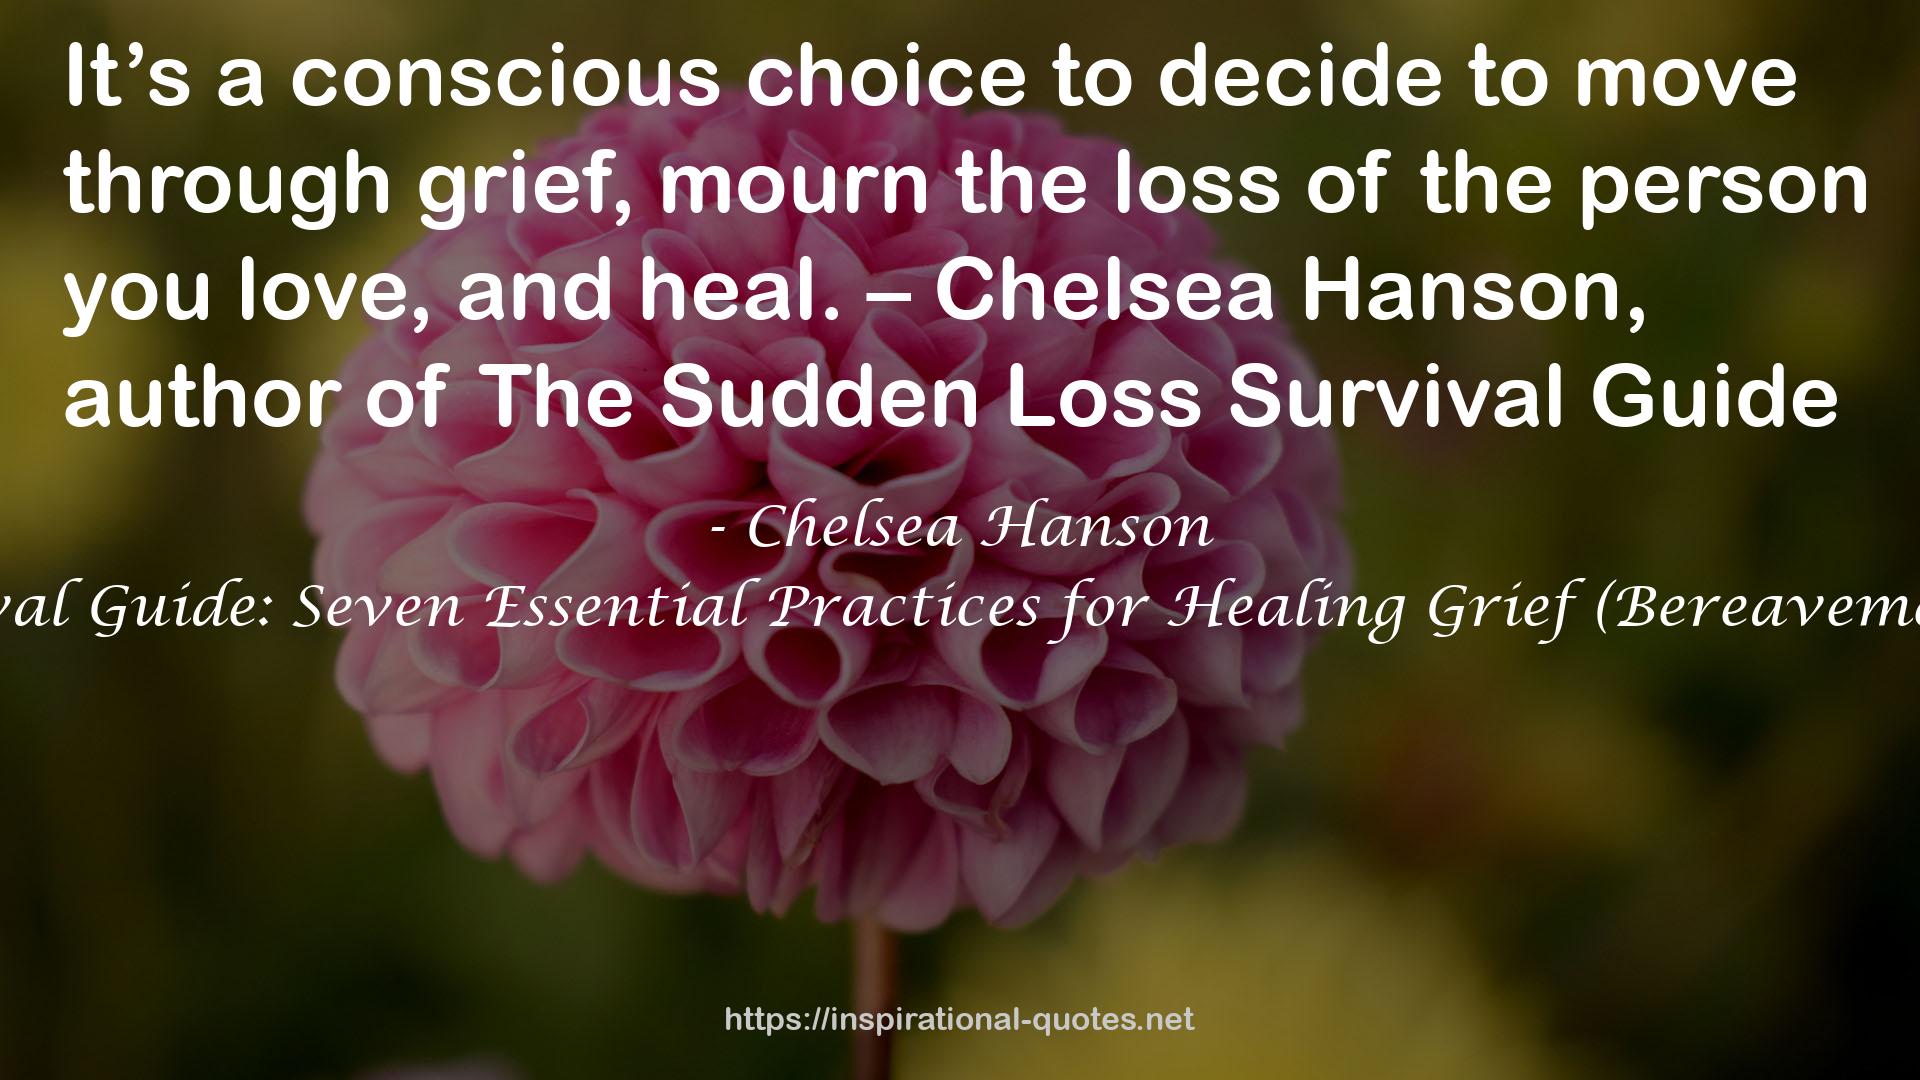 The Sudden Loss Survival Guide: Seven Essential Practices for Healing Grief (Bereavement, Suicide, Mourning) QUOTES